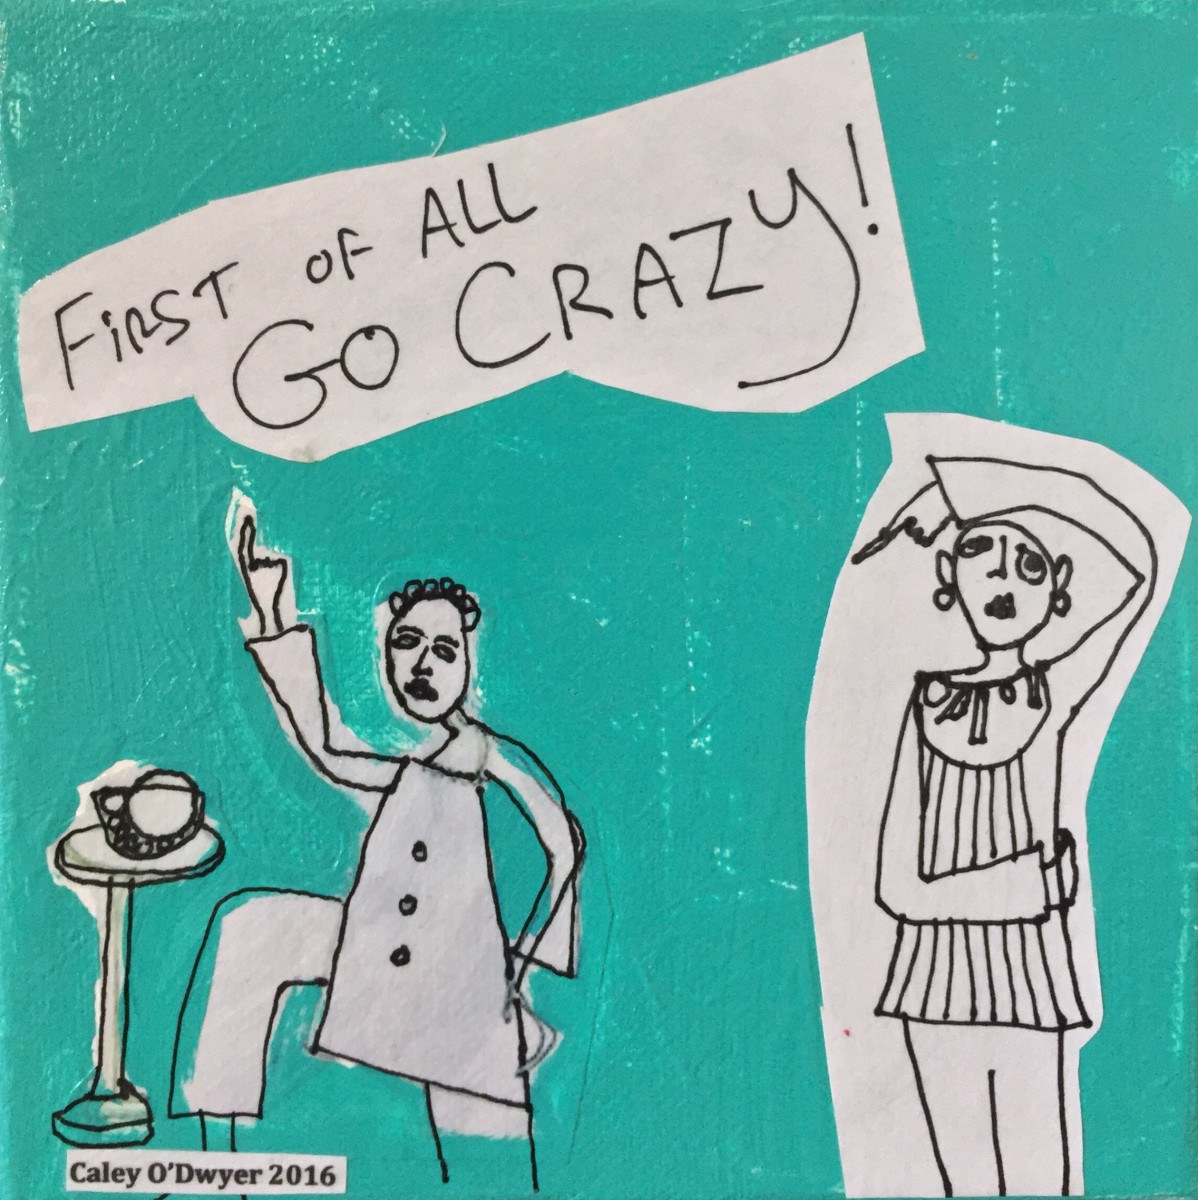 Experiments in Positive Psychology (Go Crazy) by Caley O'Dwyer 